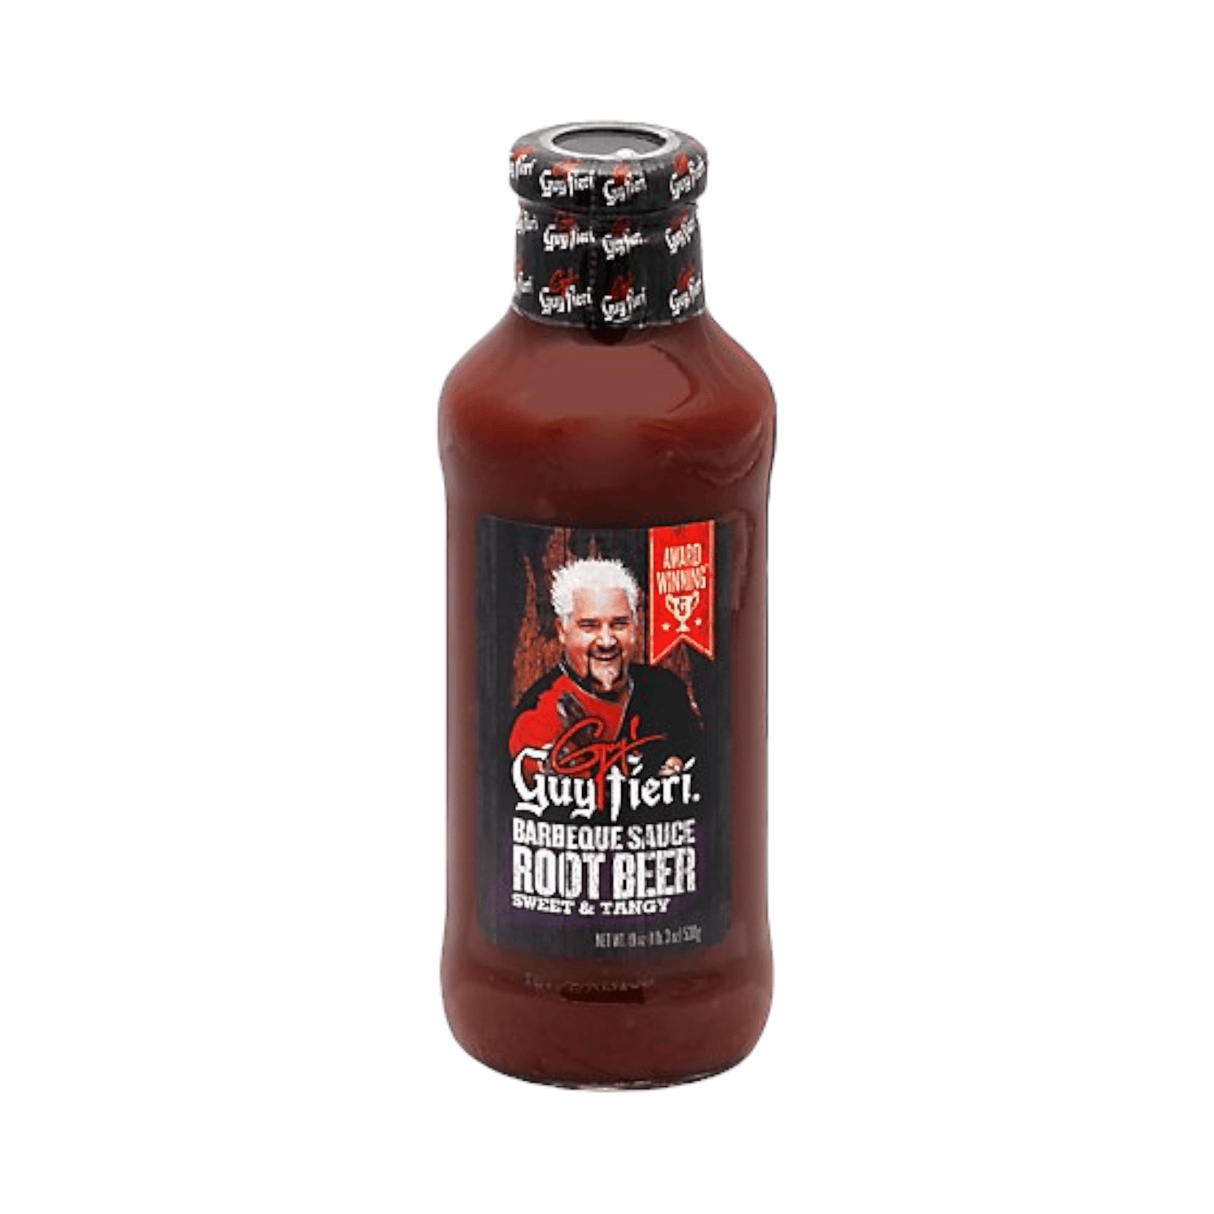 Guy Fieri Barbecue Sauce Root Beet Sweet & Tangy